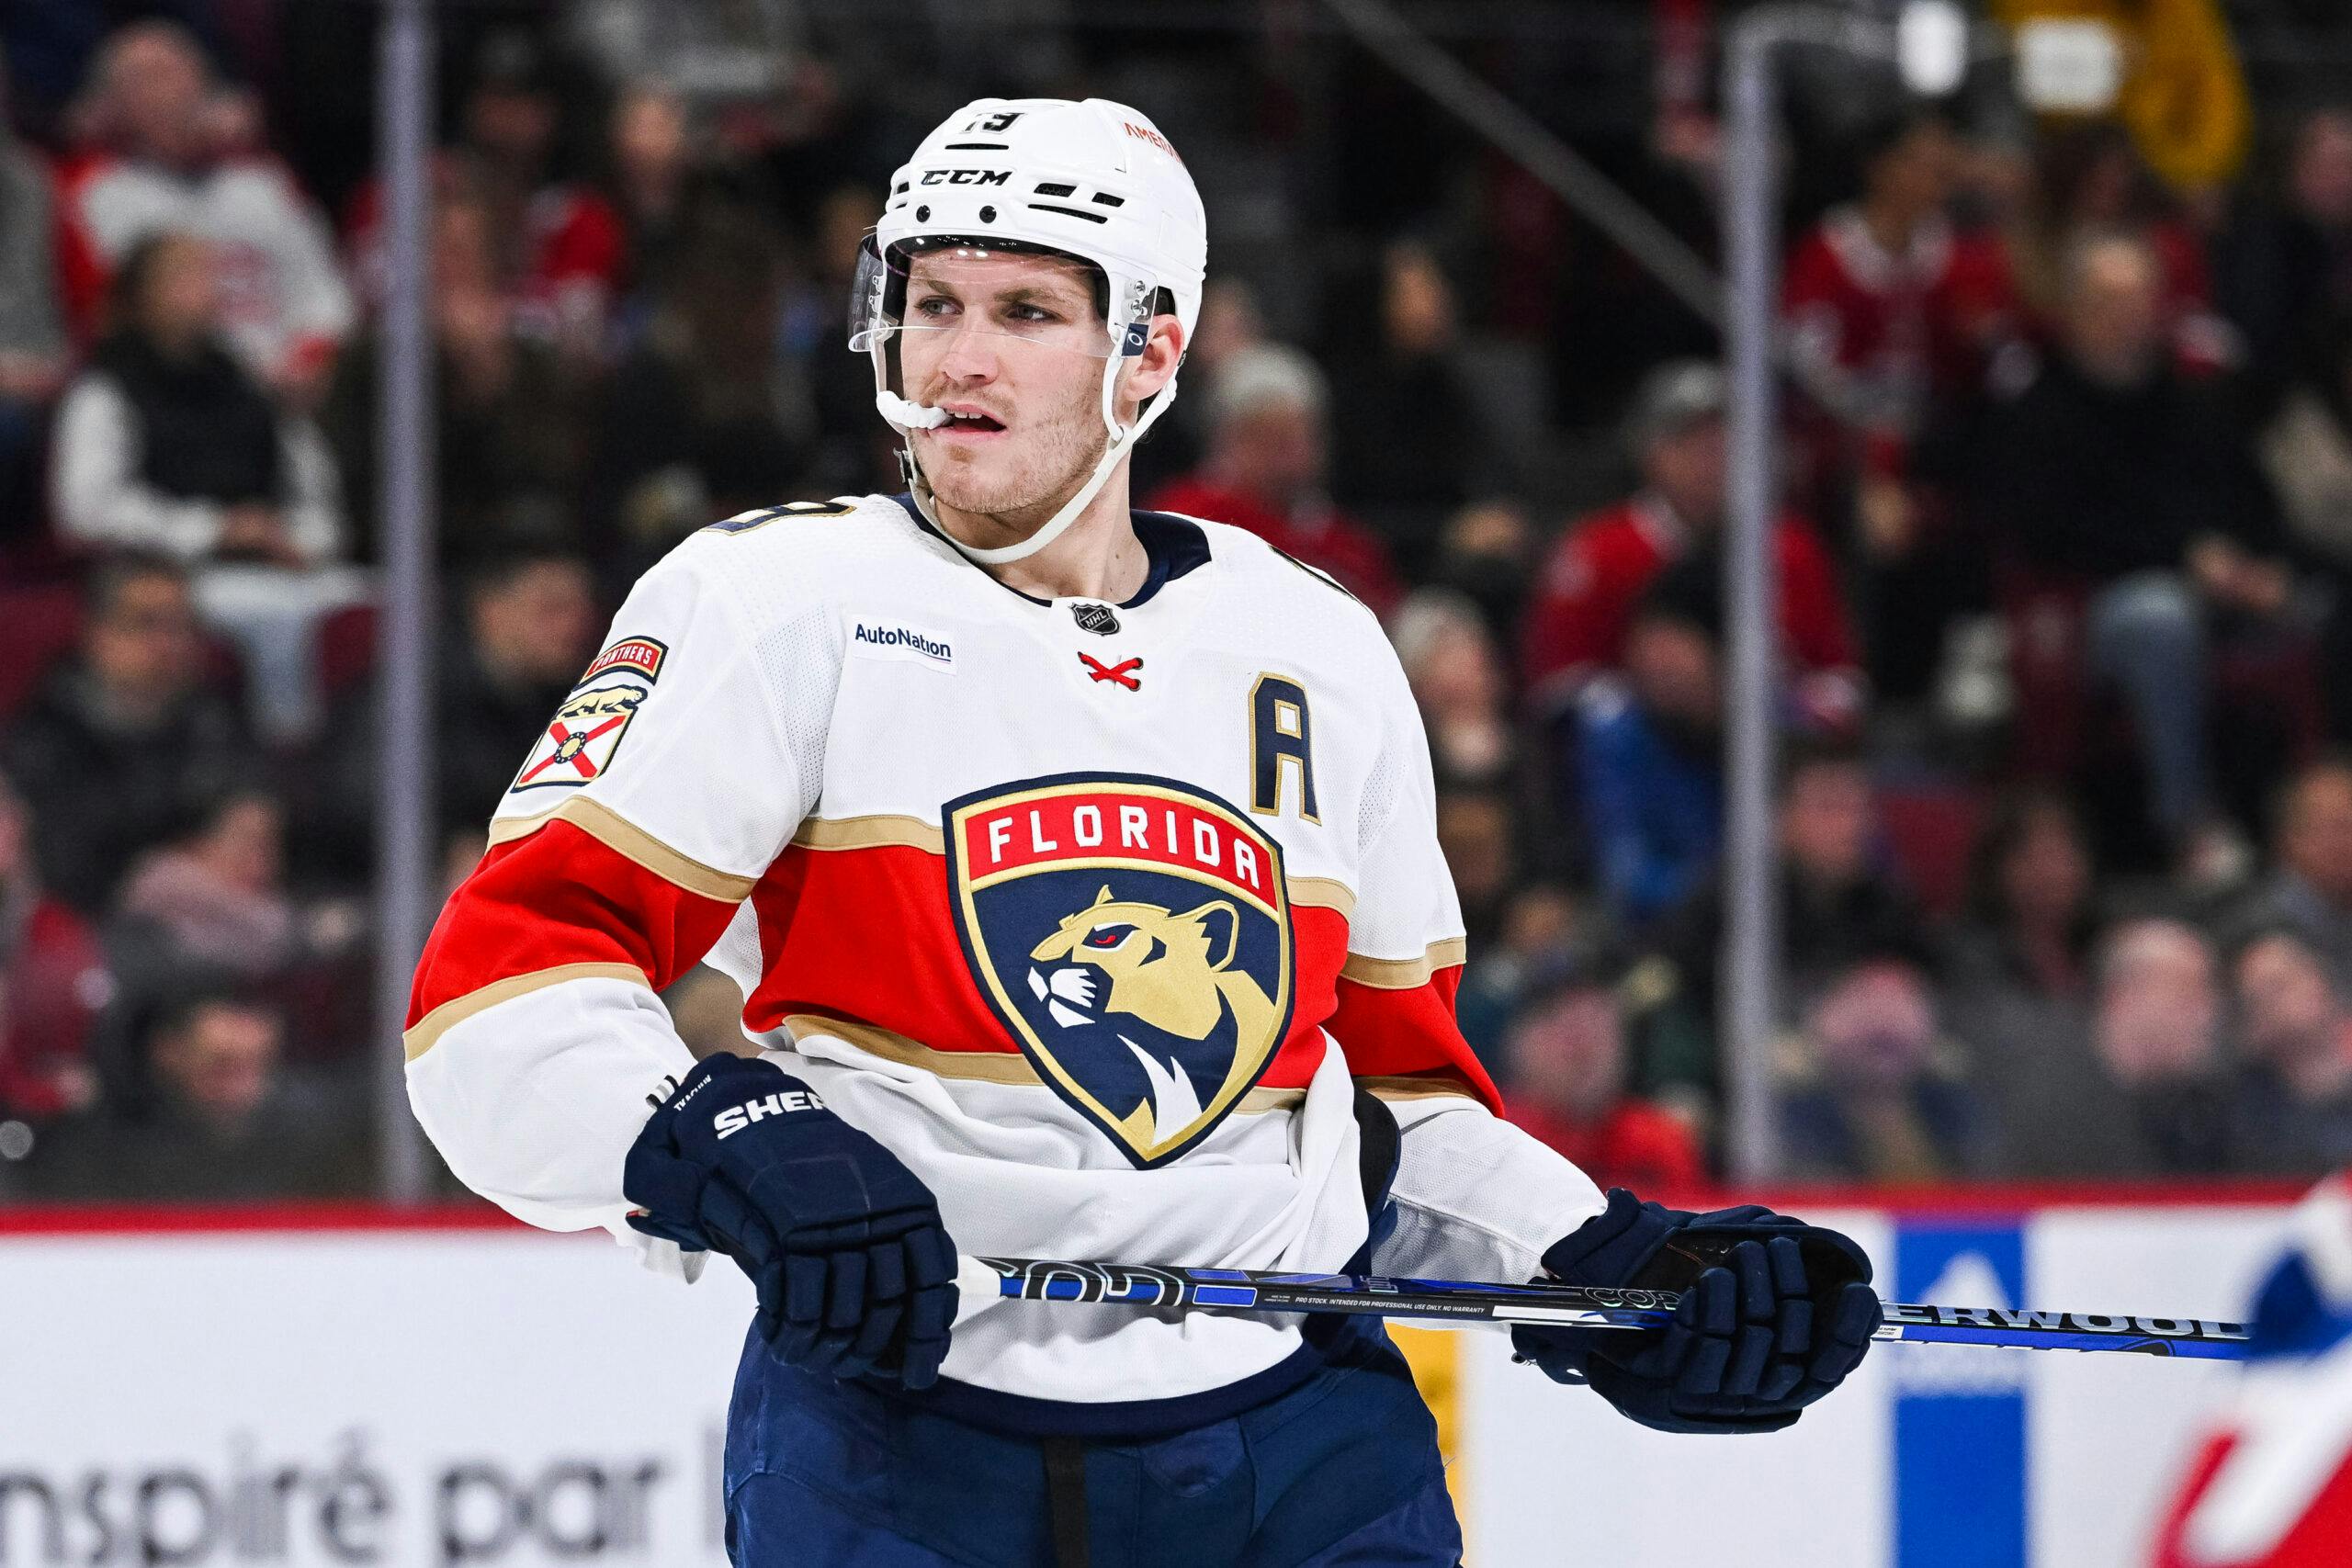 Matthew Tkachuk has the most points by a Panthers player through